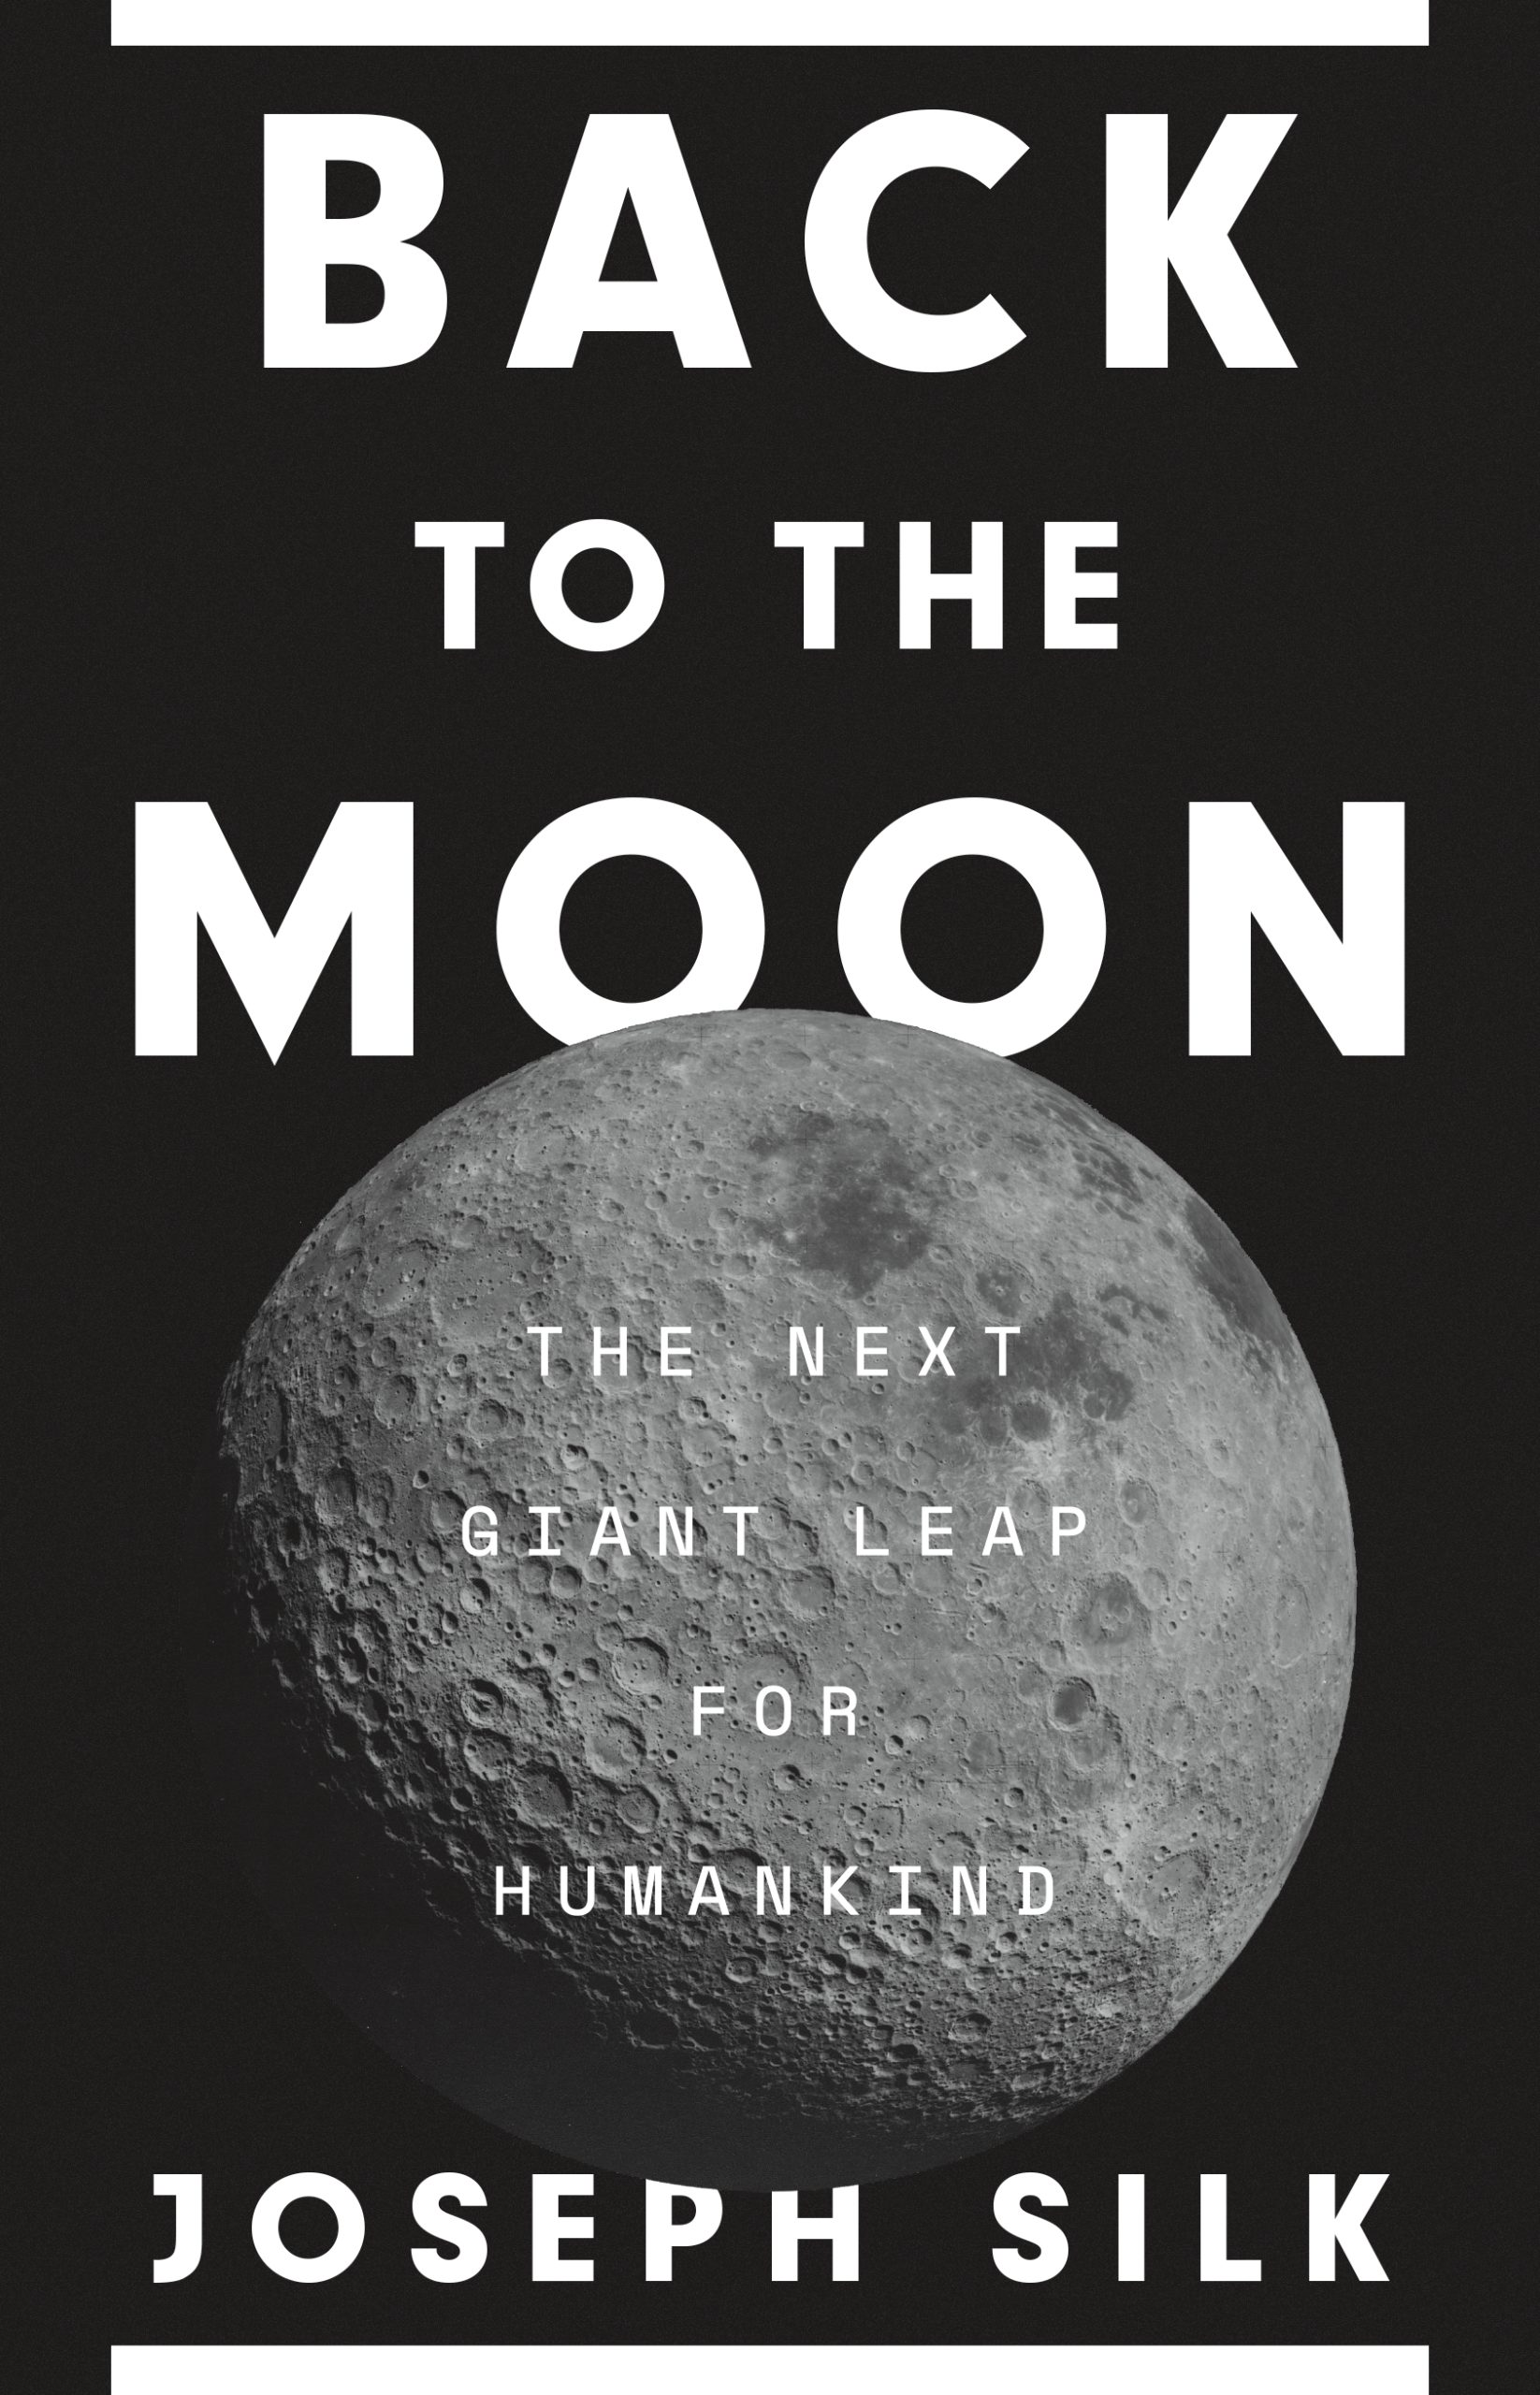 Joe Silk Authors ‘Back to the Moon: The Next Giant Leap for Humankind’